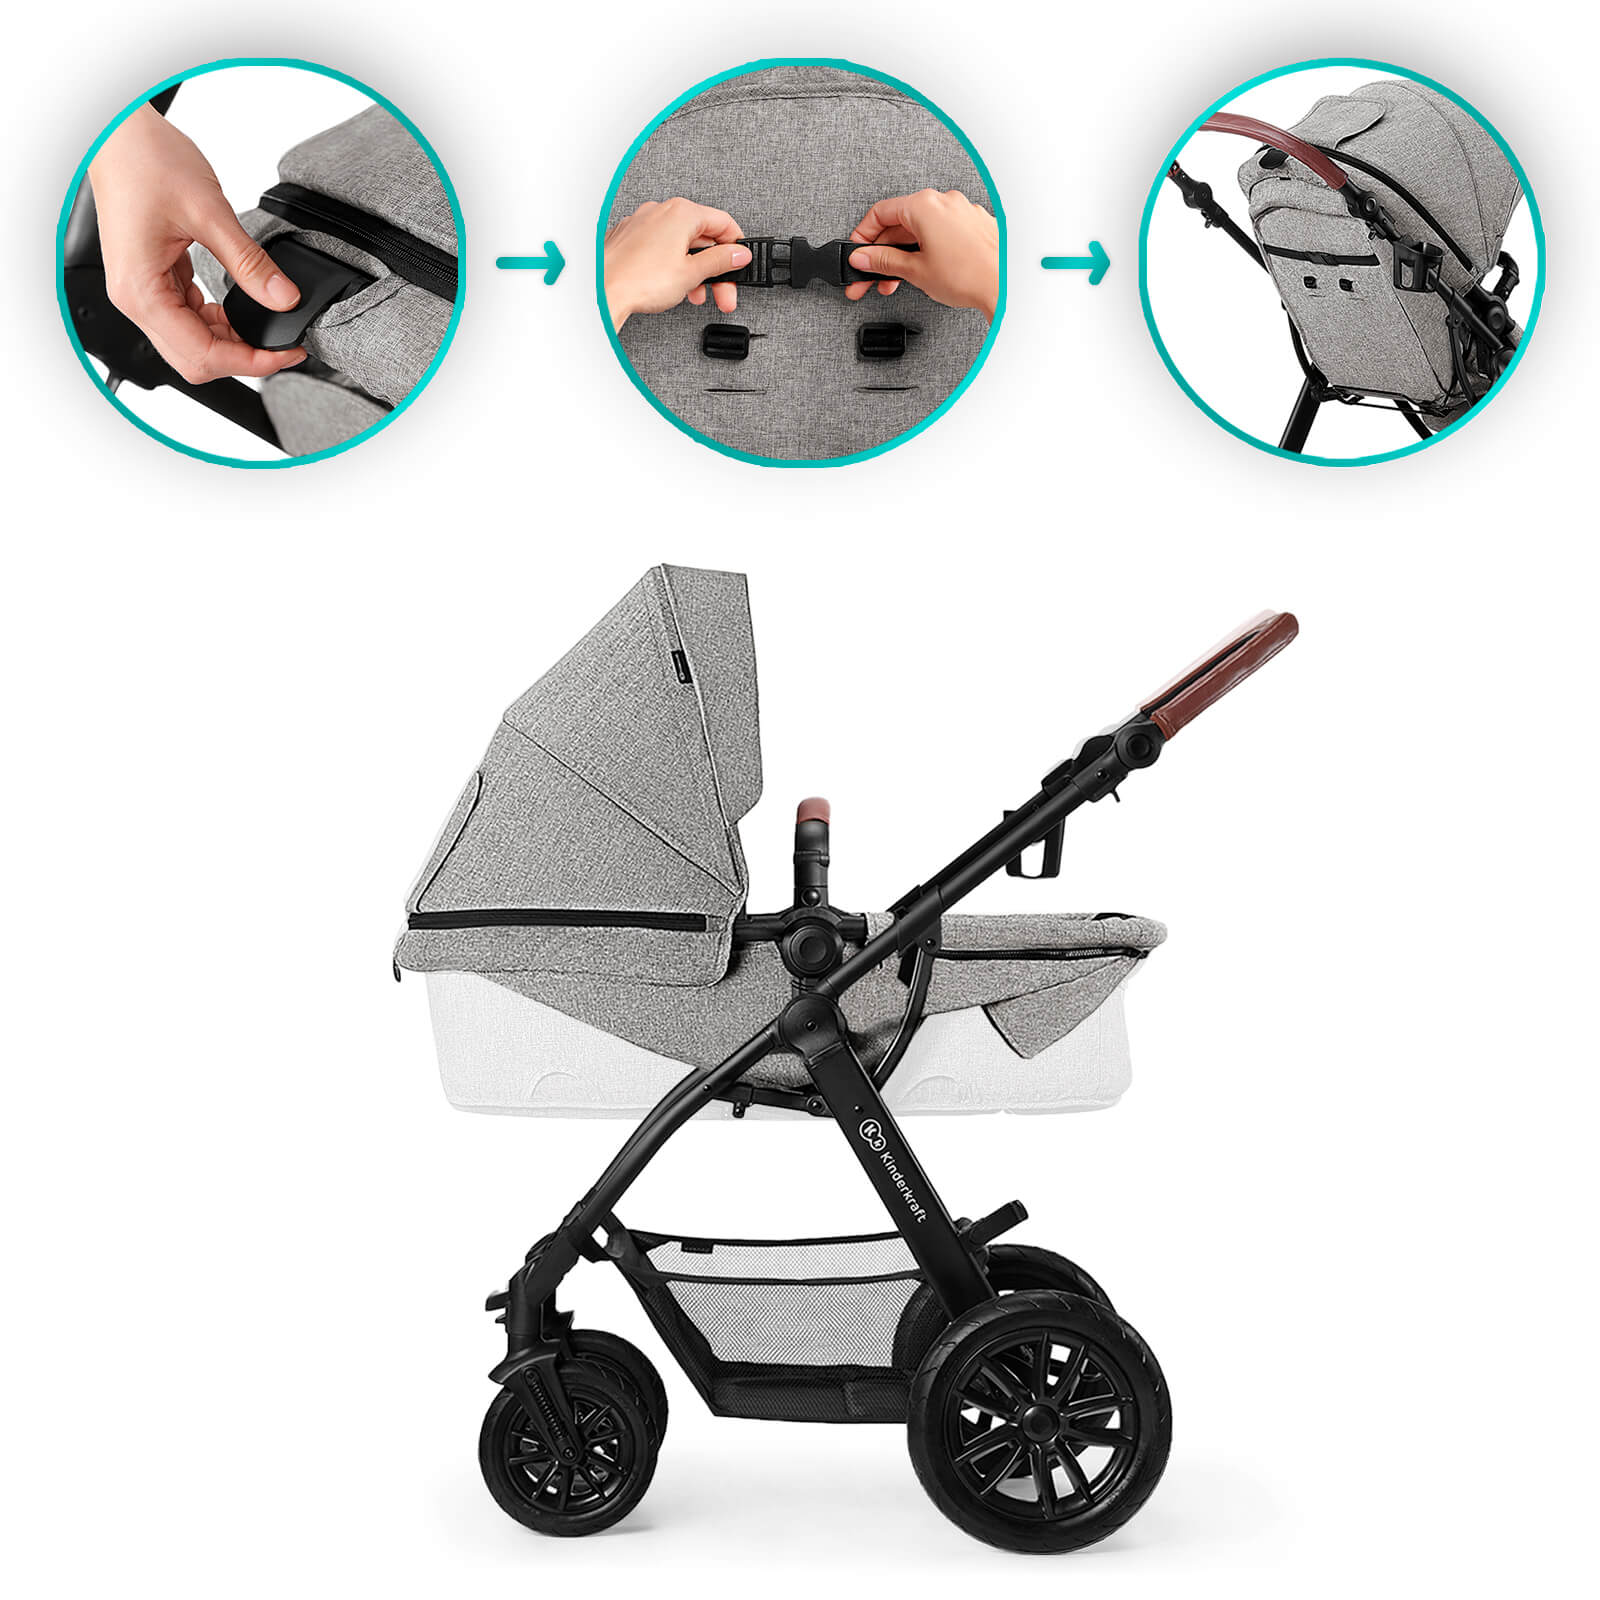 Seat 2-in-1: a carrycot and a stroller